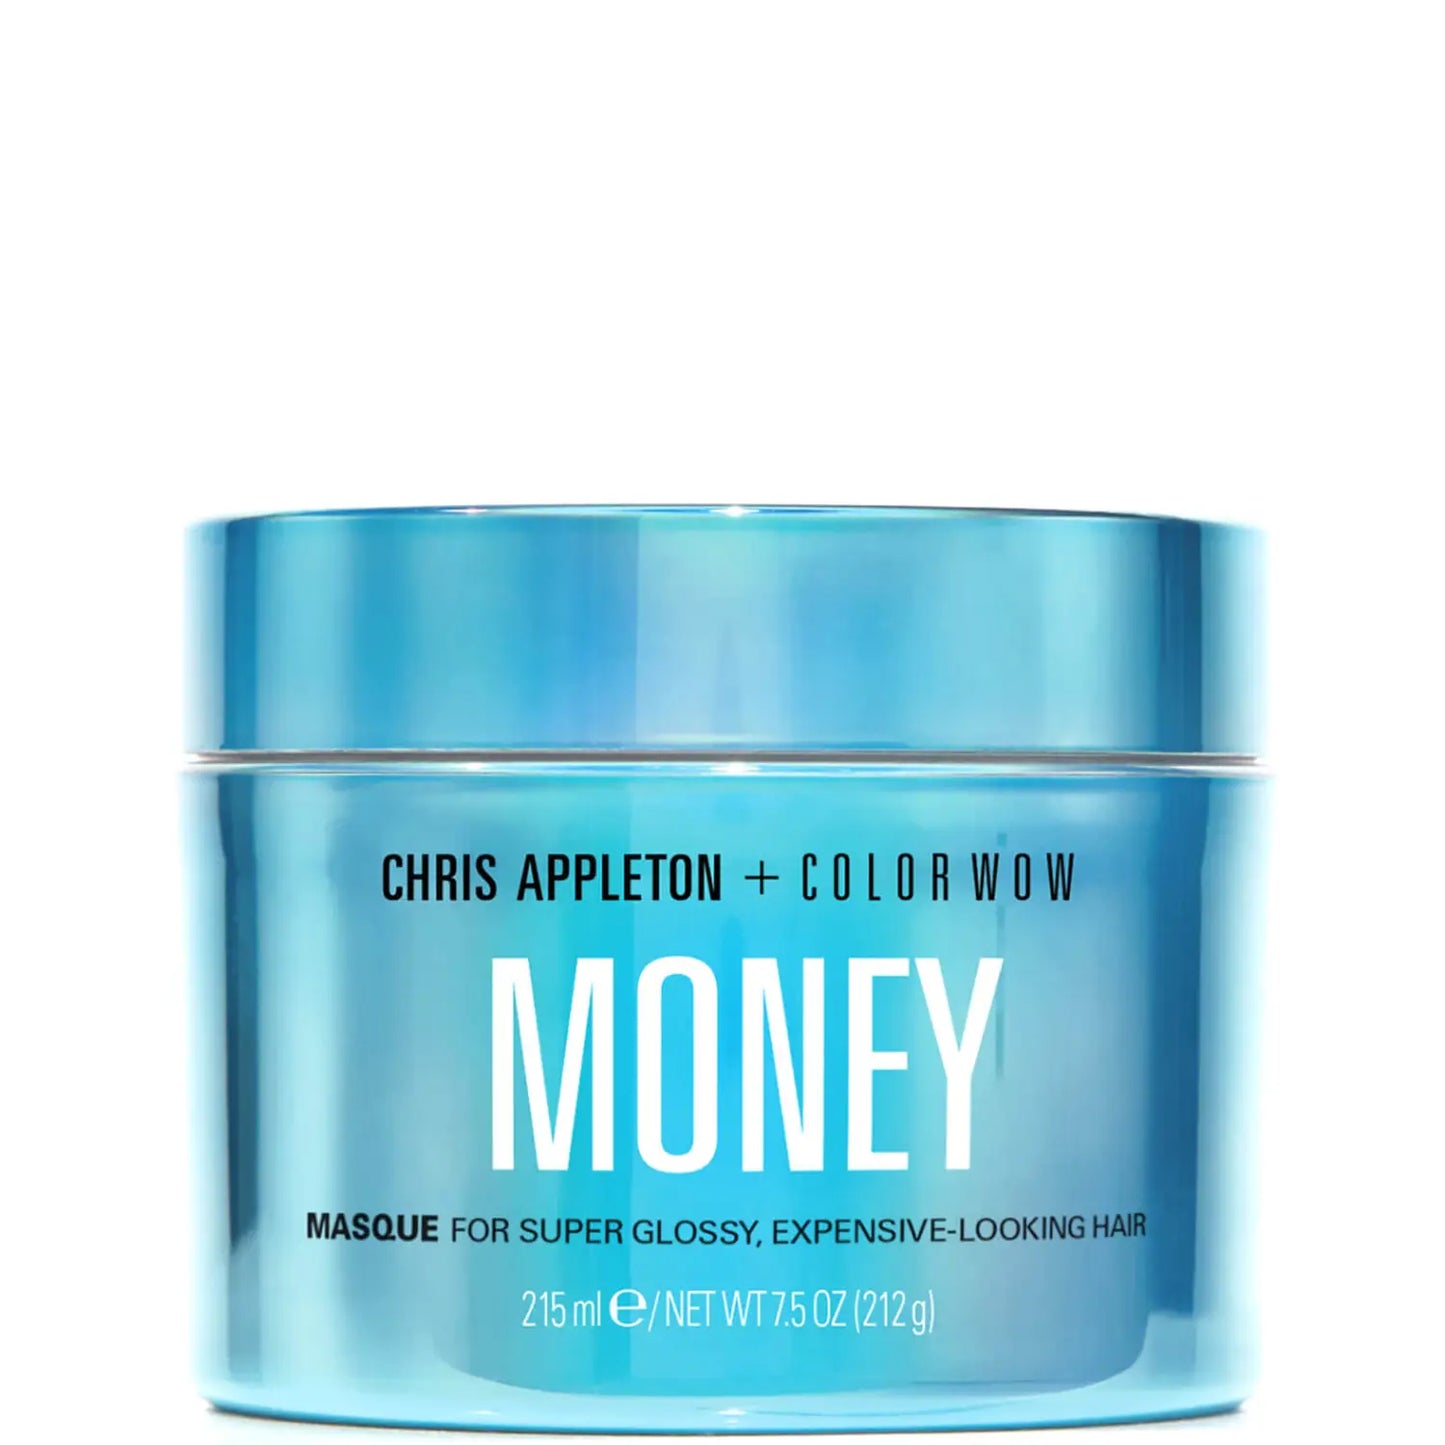 COLOR WOW AND CHRIS APPLETON | MONEY MASQUE